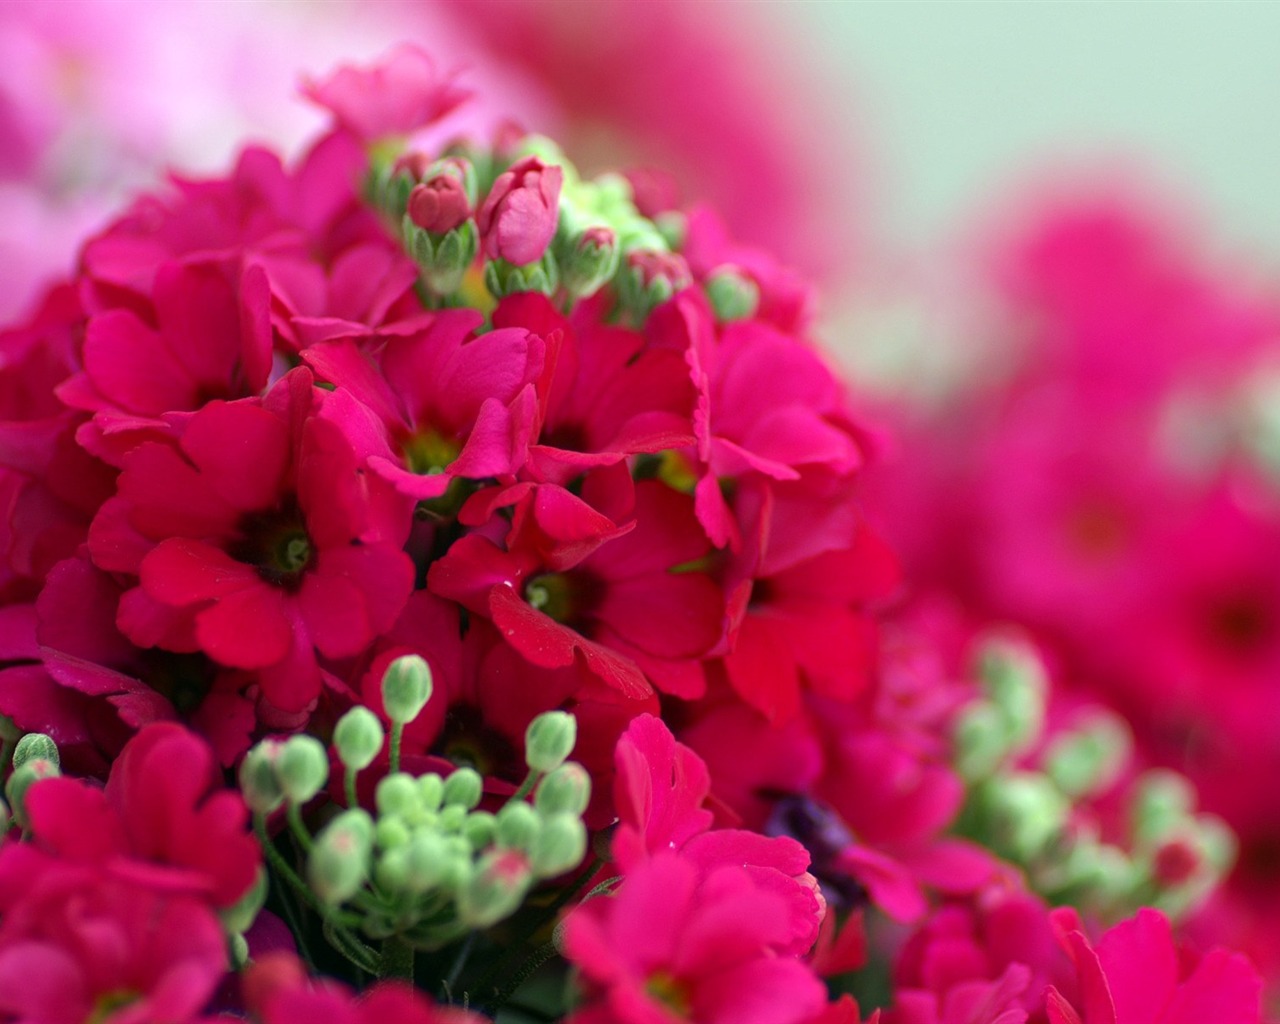 Personal Flowers HD Wallpapers #27 - 1280x1024